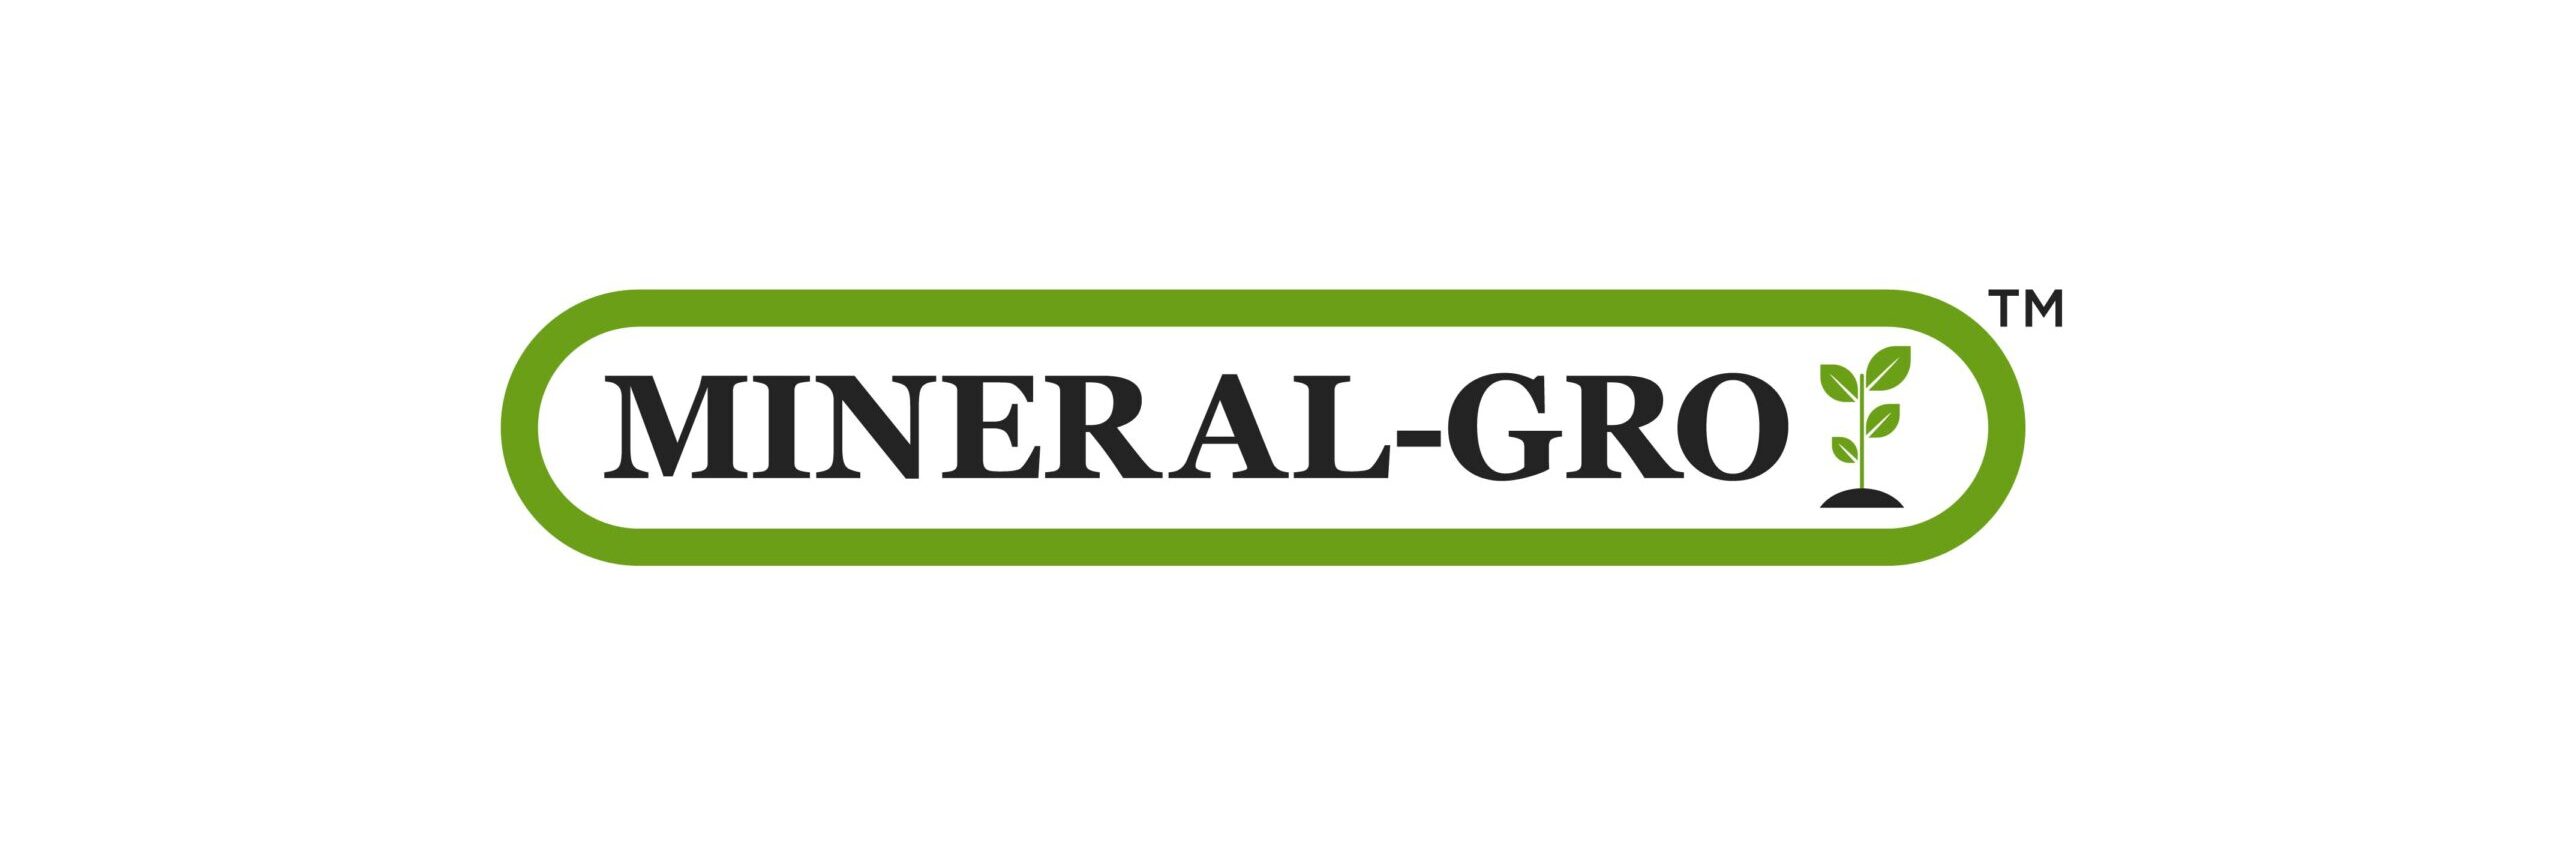 Mineral-Gro - trace minerals